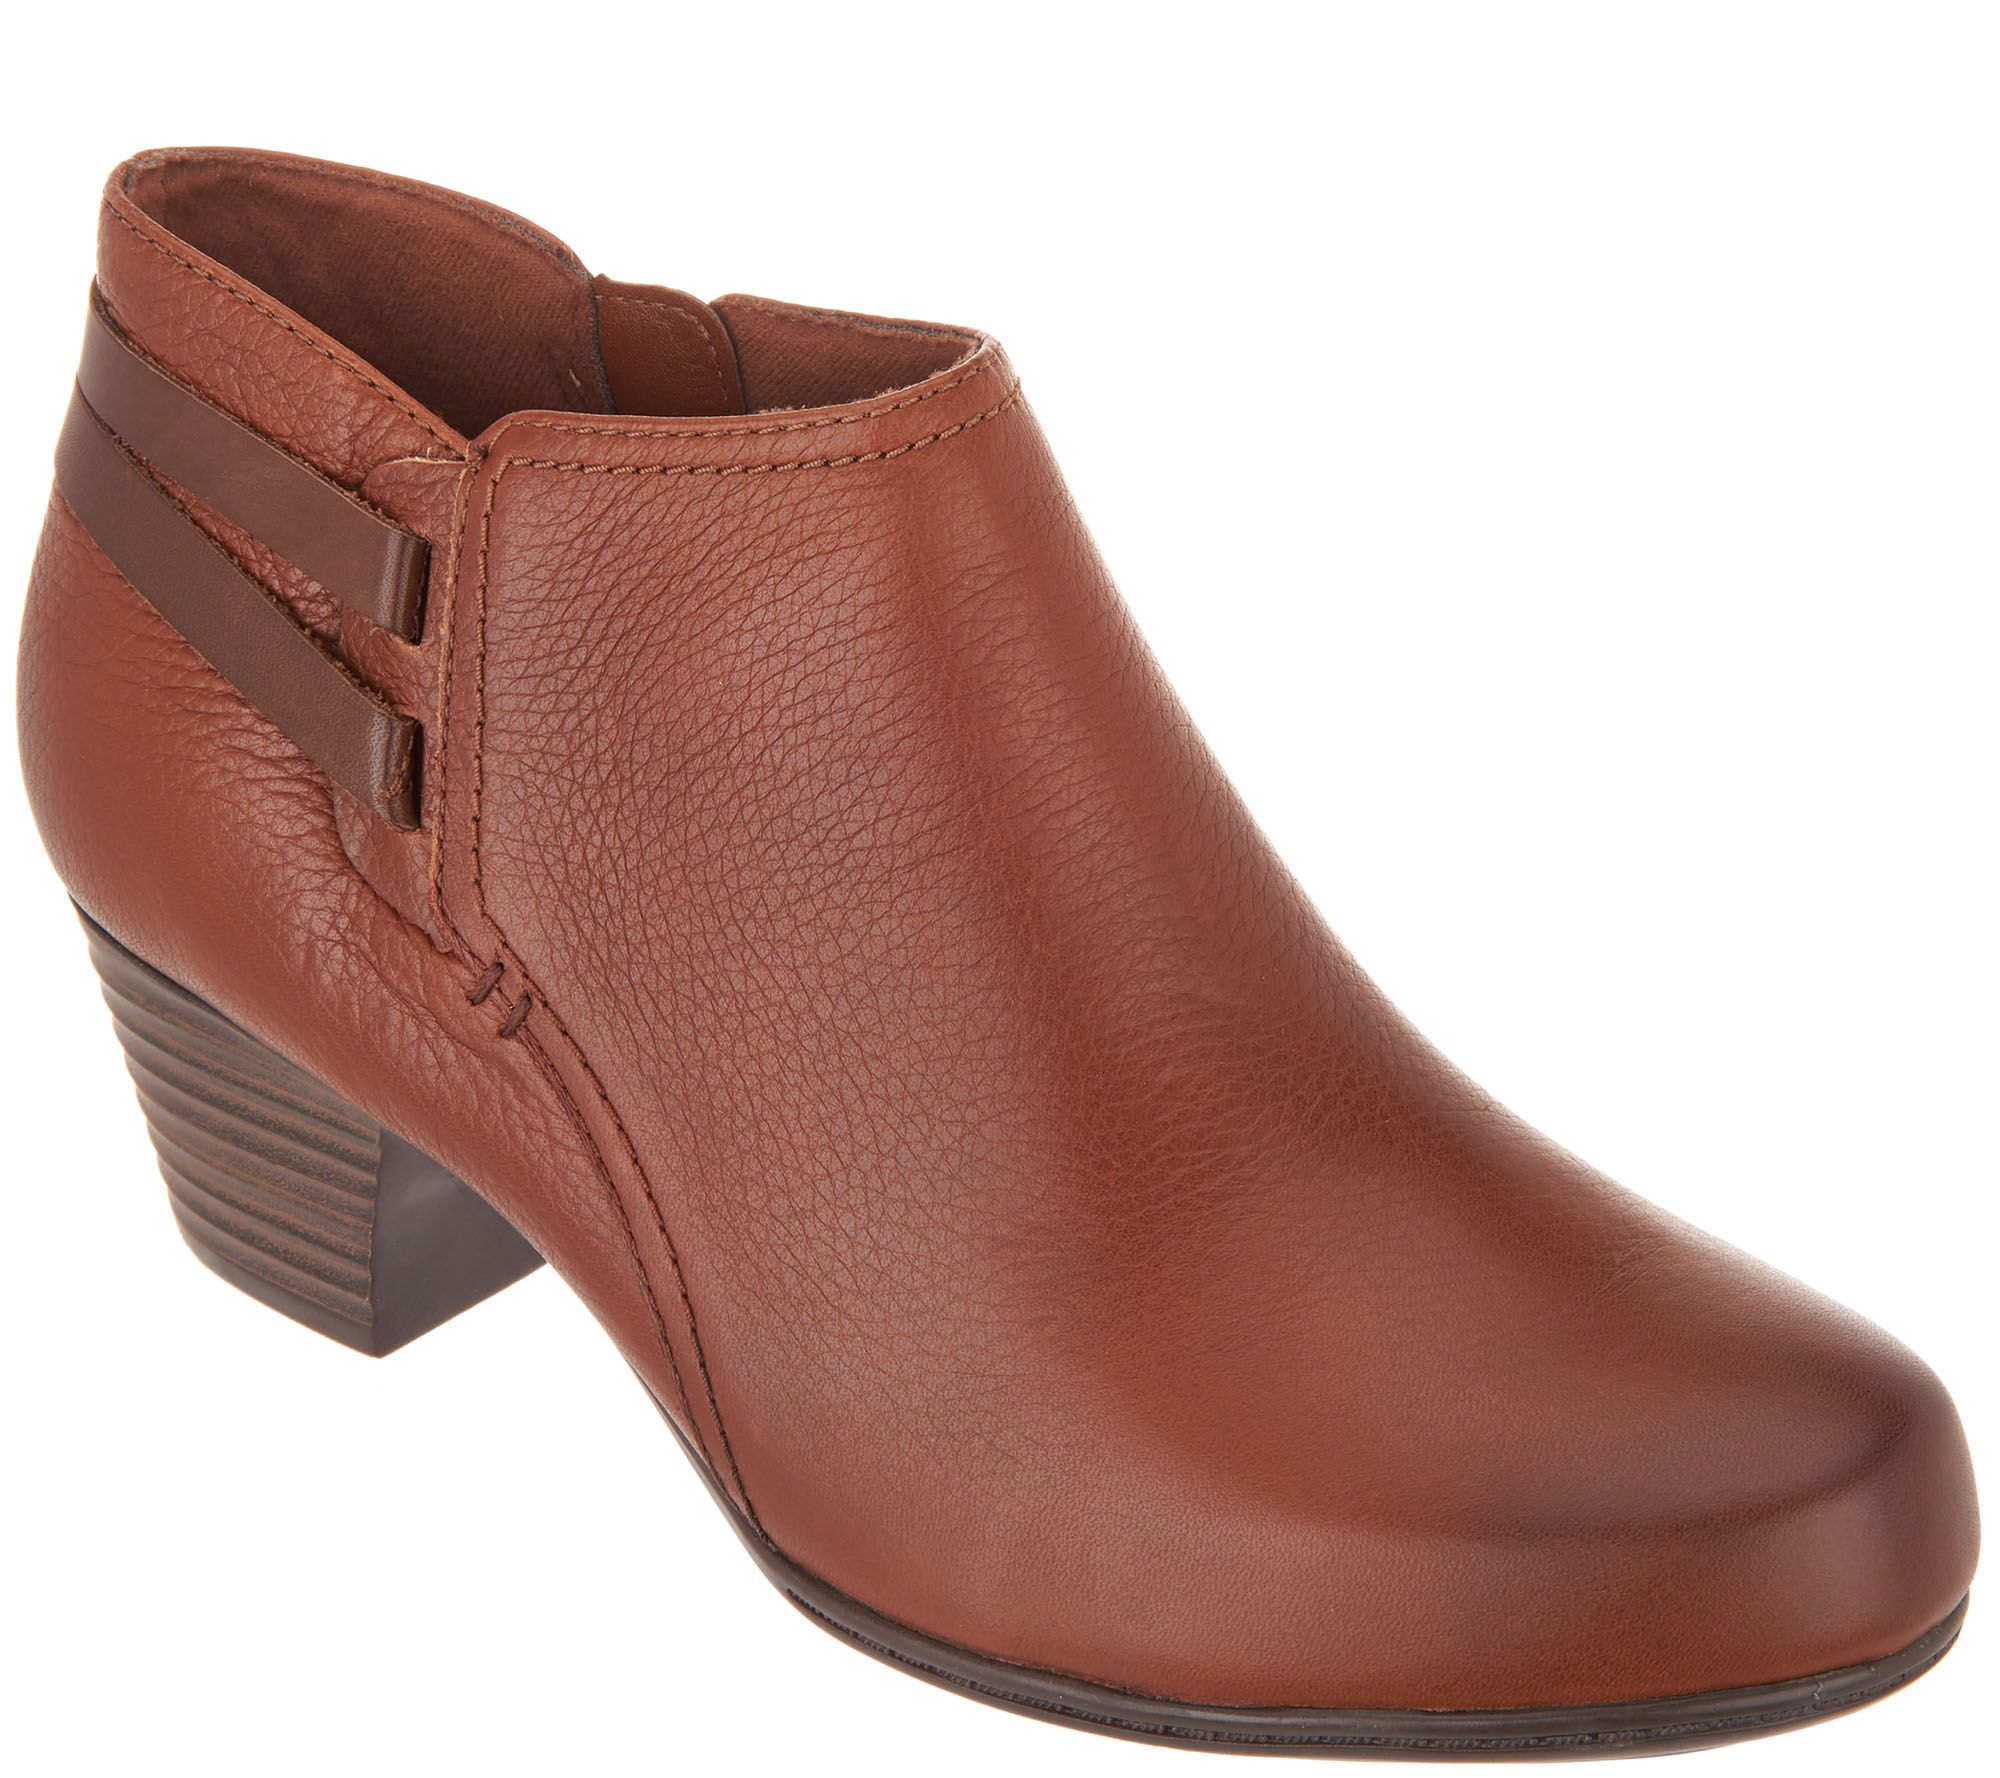 qvc clarks ankle boots